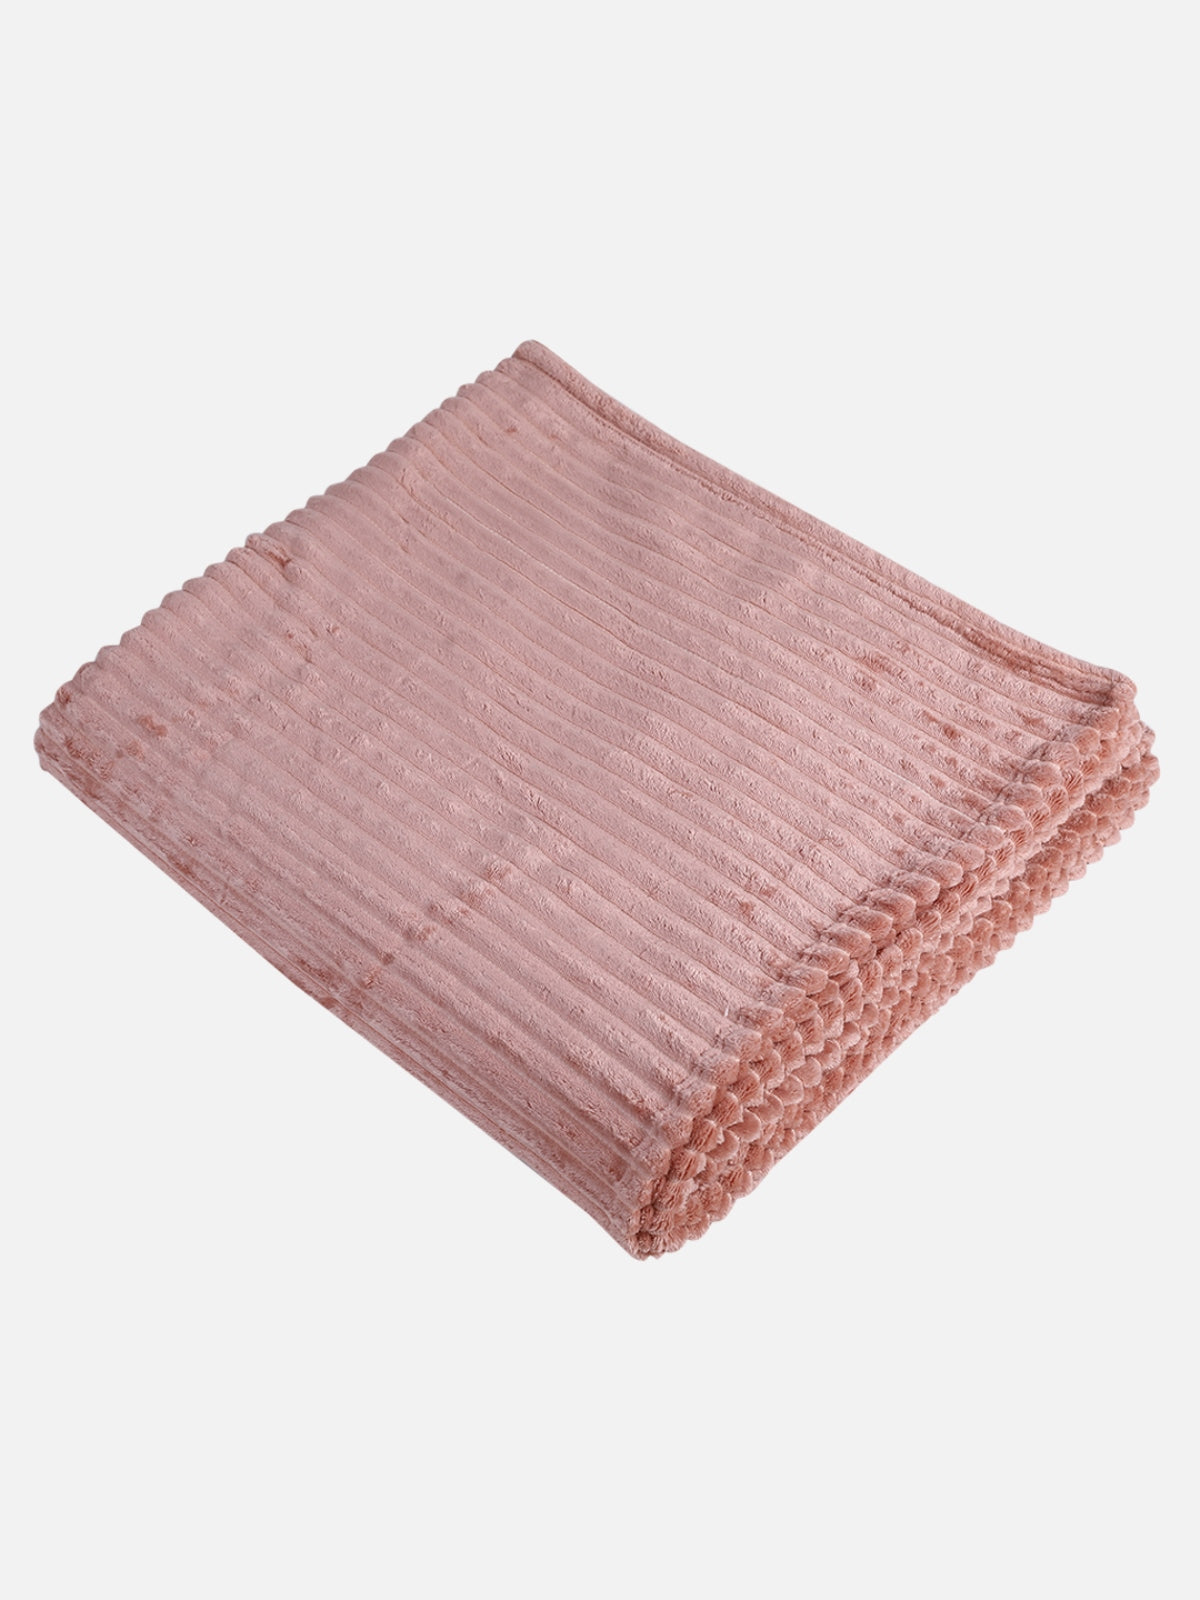 Peach 500 GSM Double Bed Stripes Patterned Sherpa Wool Blanket